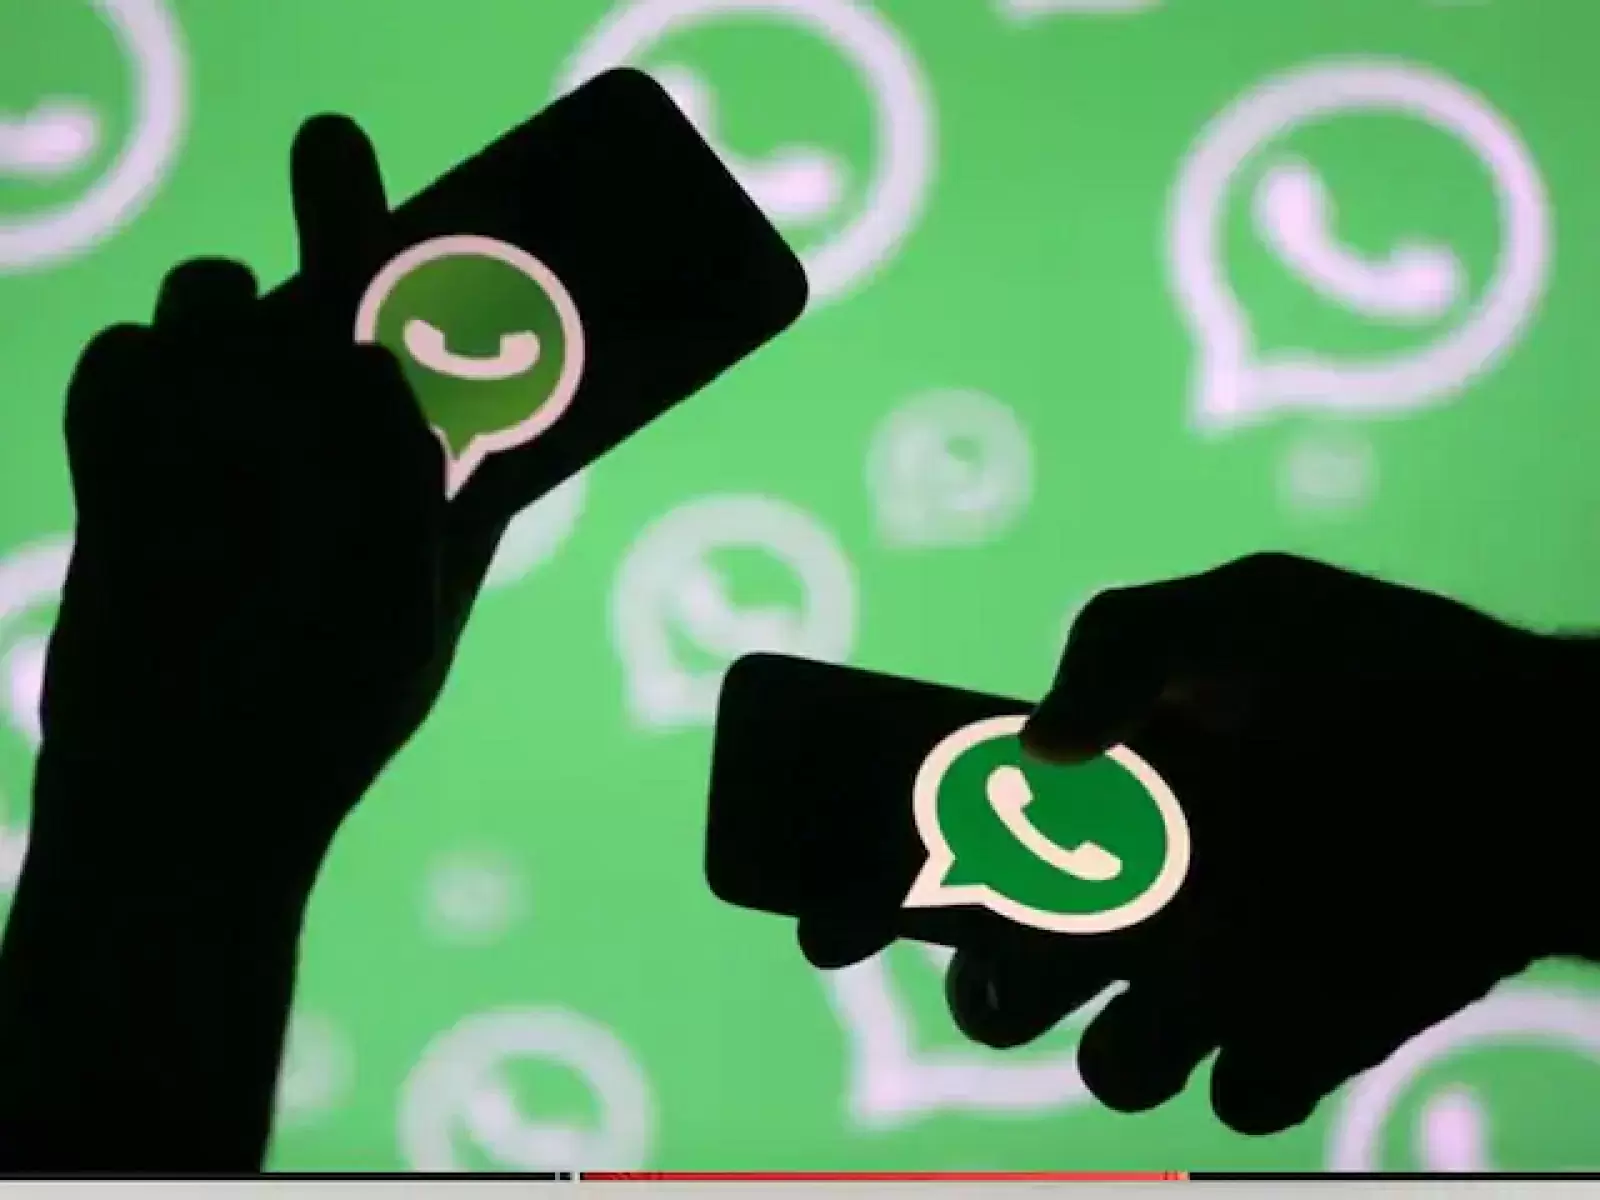 Calling your special contacts on WhatsApp will become even easier, this new feature is going to be available soon